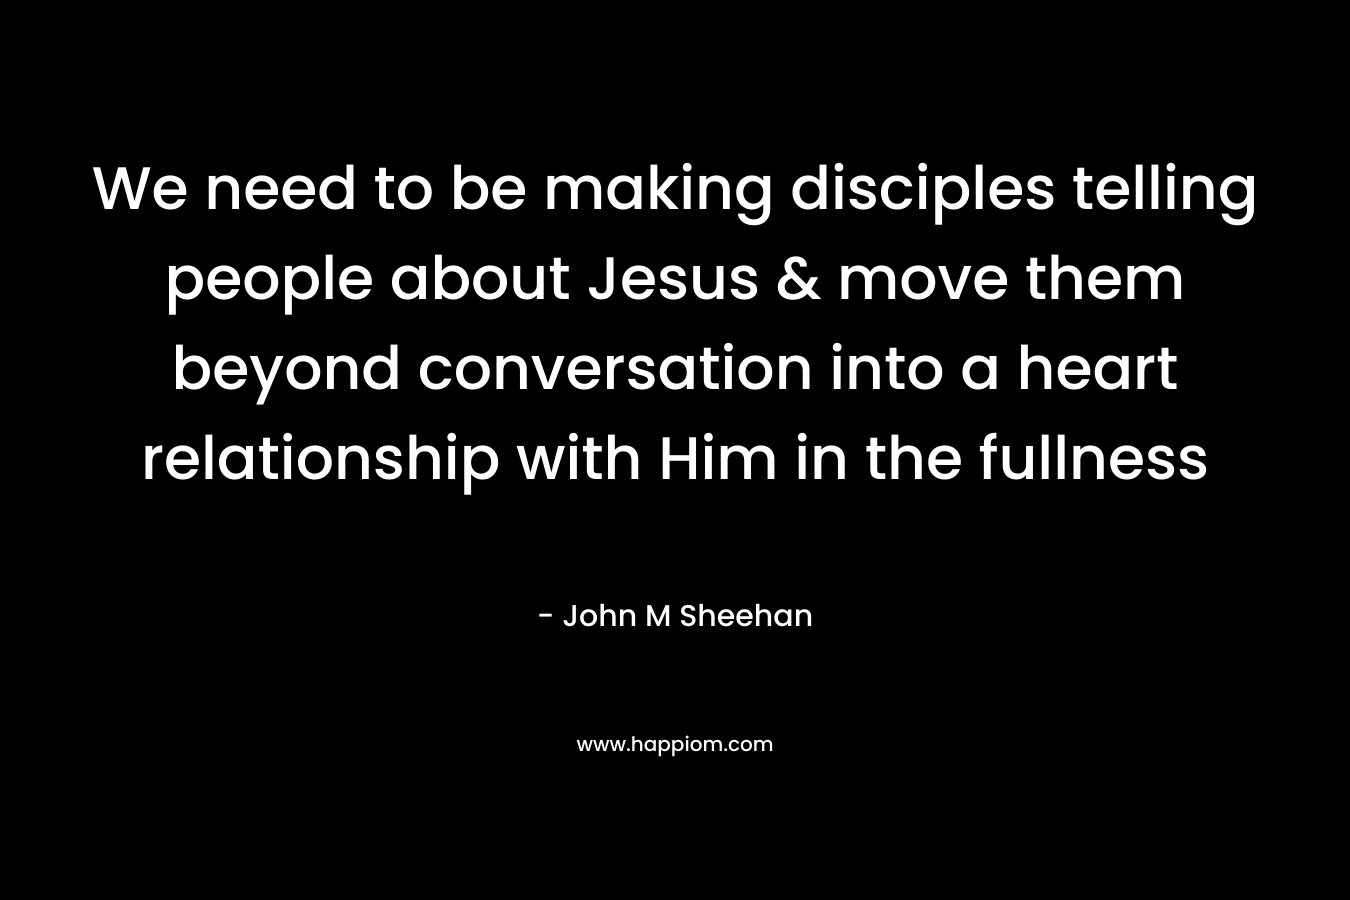 We need to be making disciples telling people about Jesus & move them beyond conversation into a heart relationship with Him in the fullness – John M Sheehan